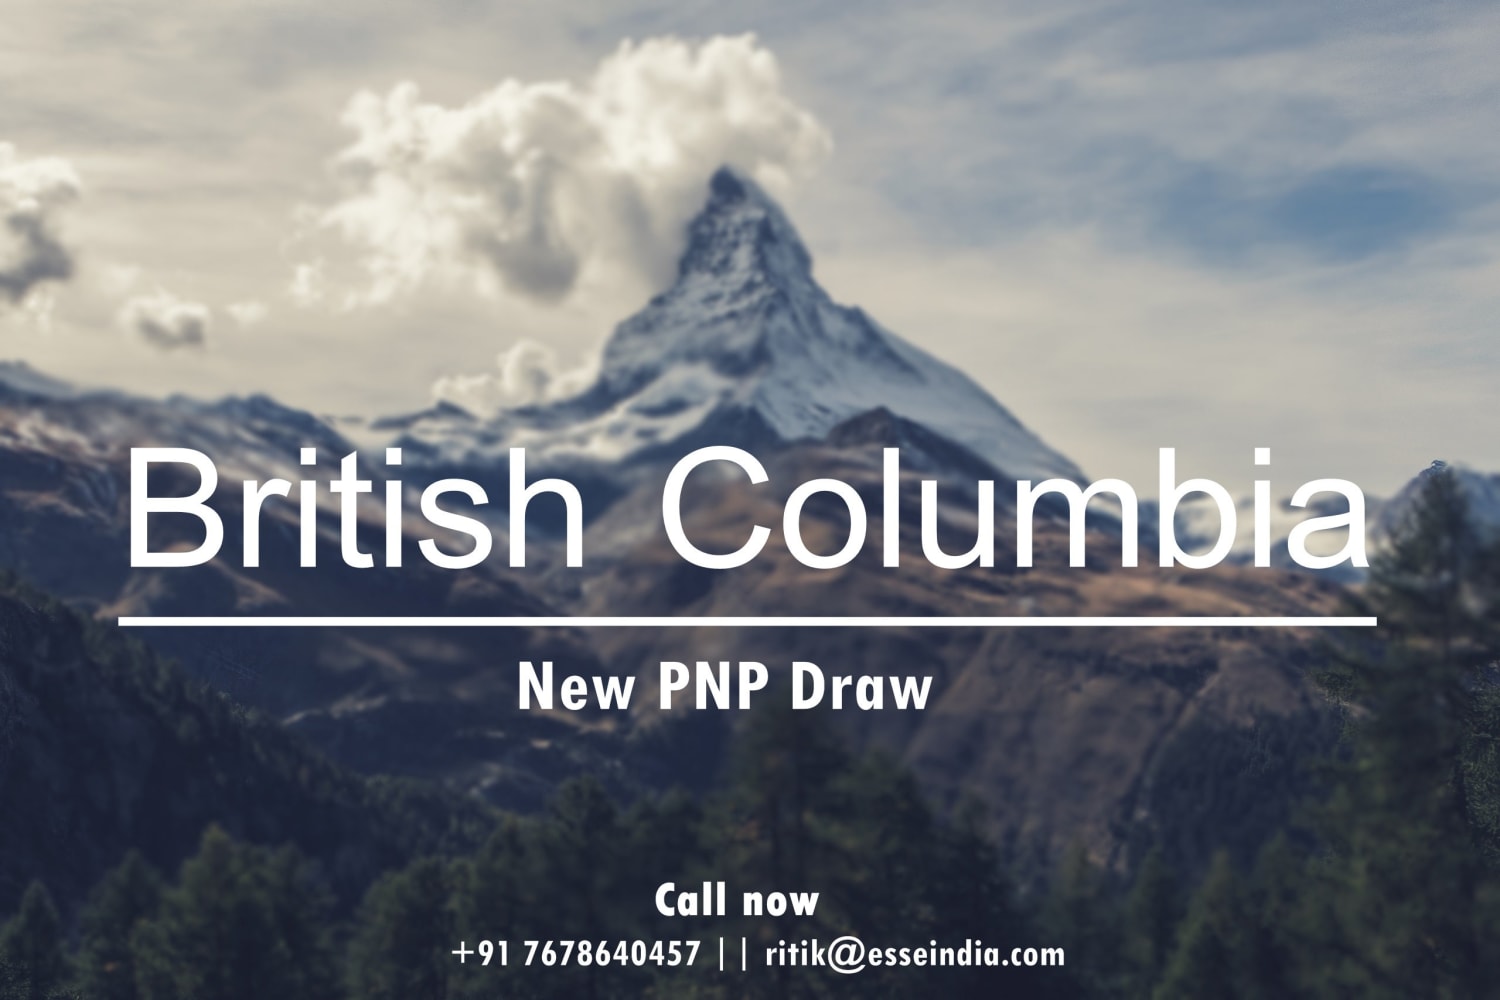 British Columbia invites 72 IT workers in new PNP draw